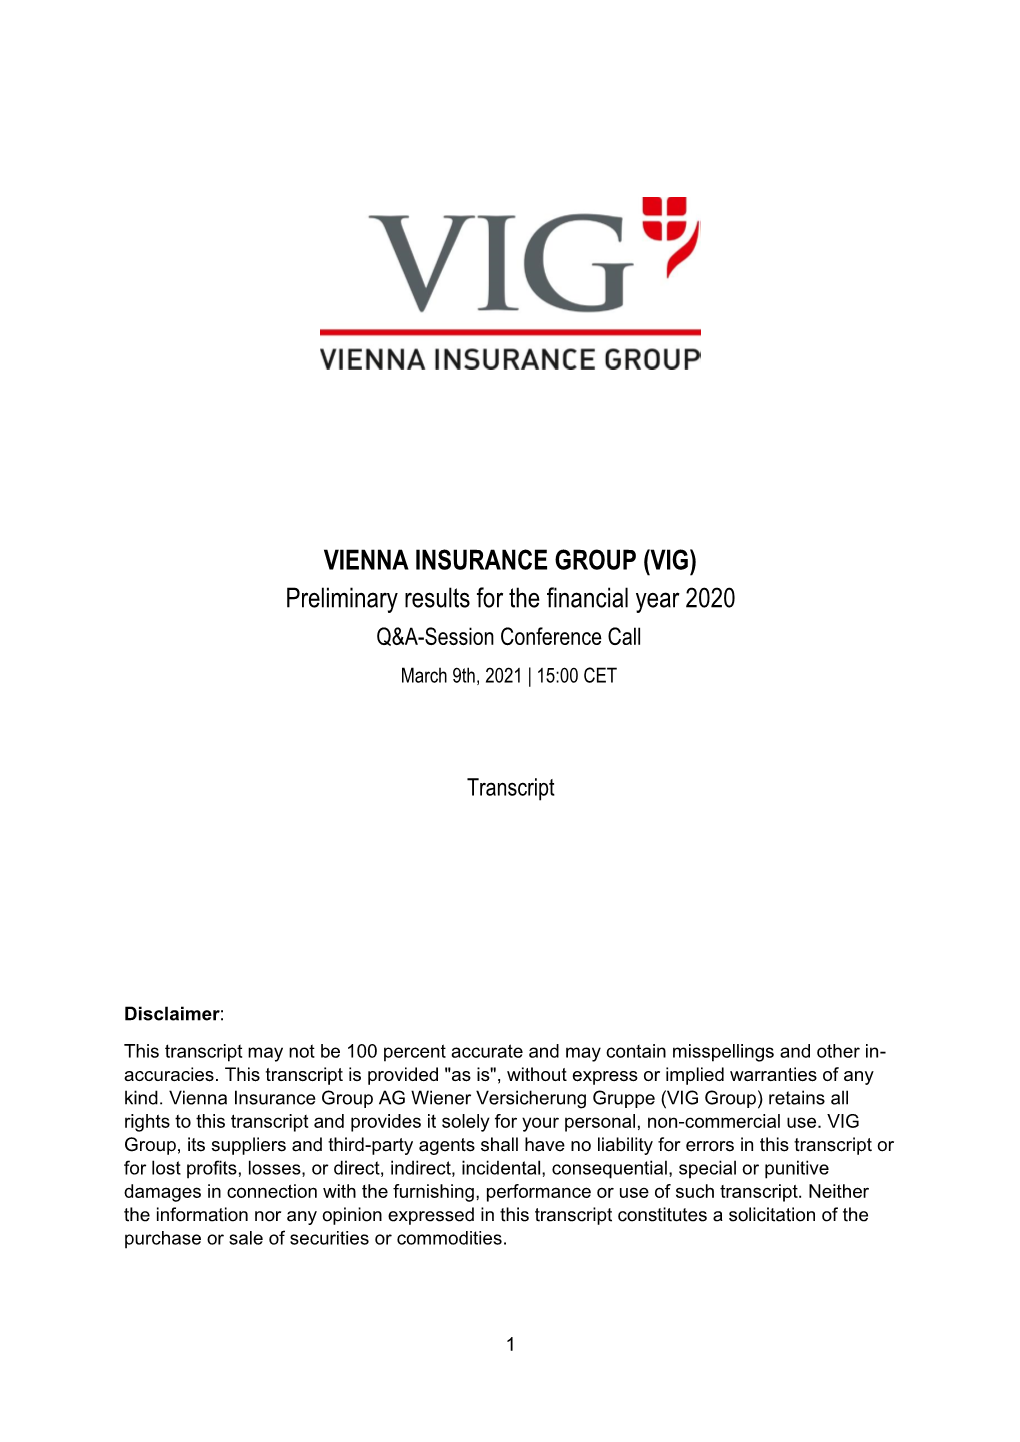 VIENNA INSURANCE GROUP (VIG) Preliminary Results for the Financial Year 2020 Q&A-Session Conference Call March 9Th, 2021 | 15:00 CET